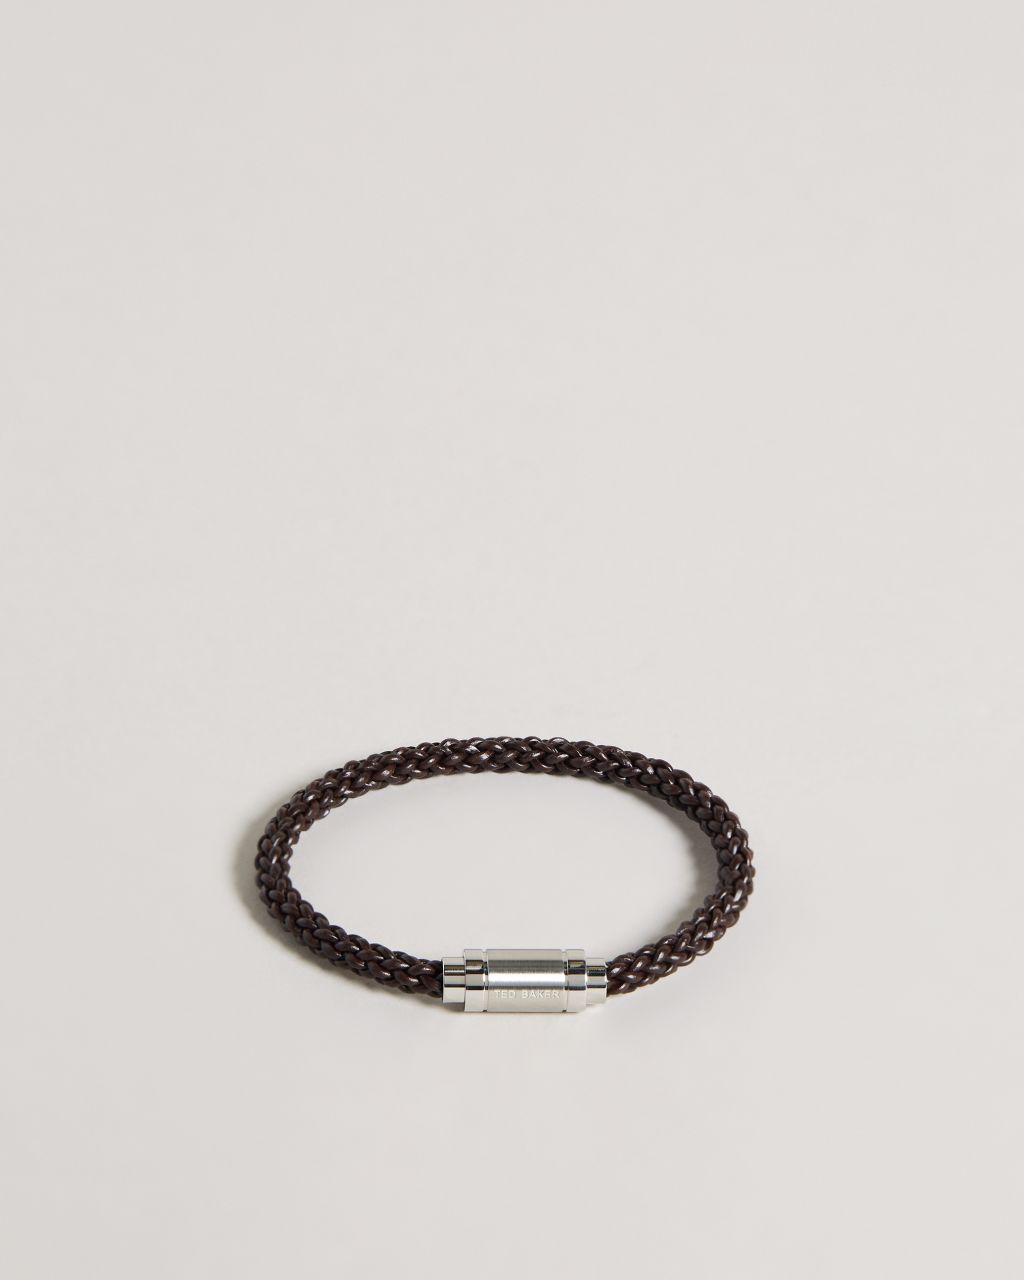 Ted Baker Men's Leather Woven Bracelet in Brown-Chocolate, Duran